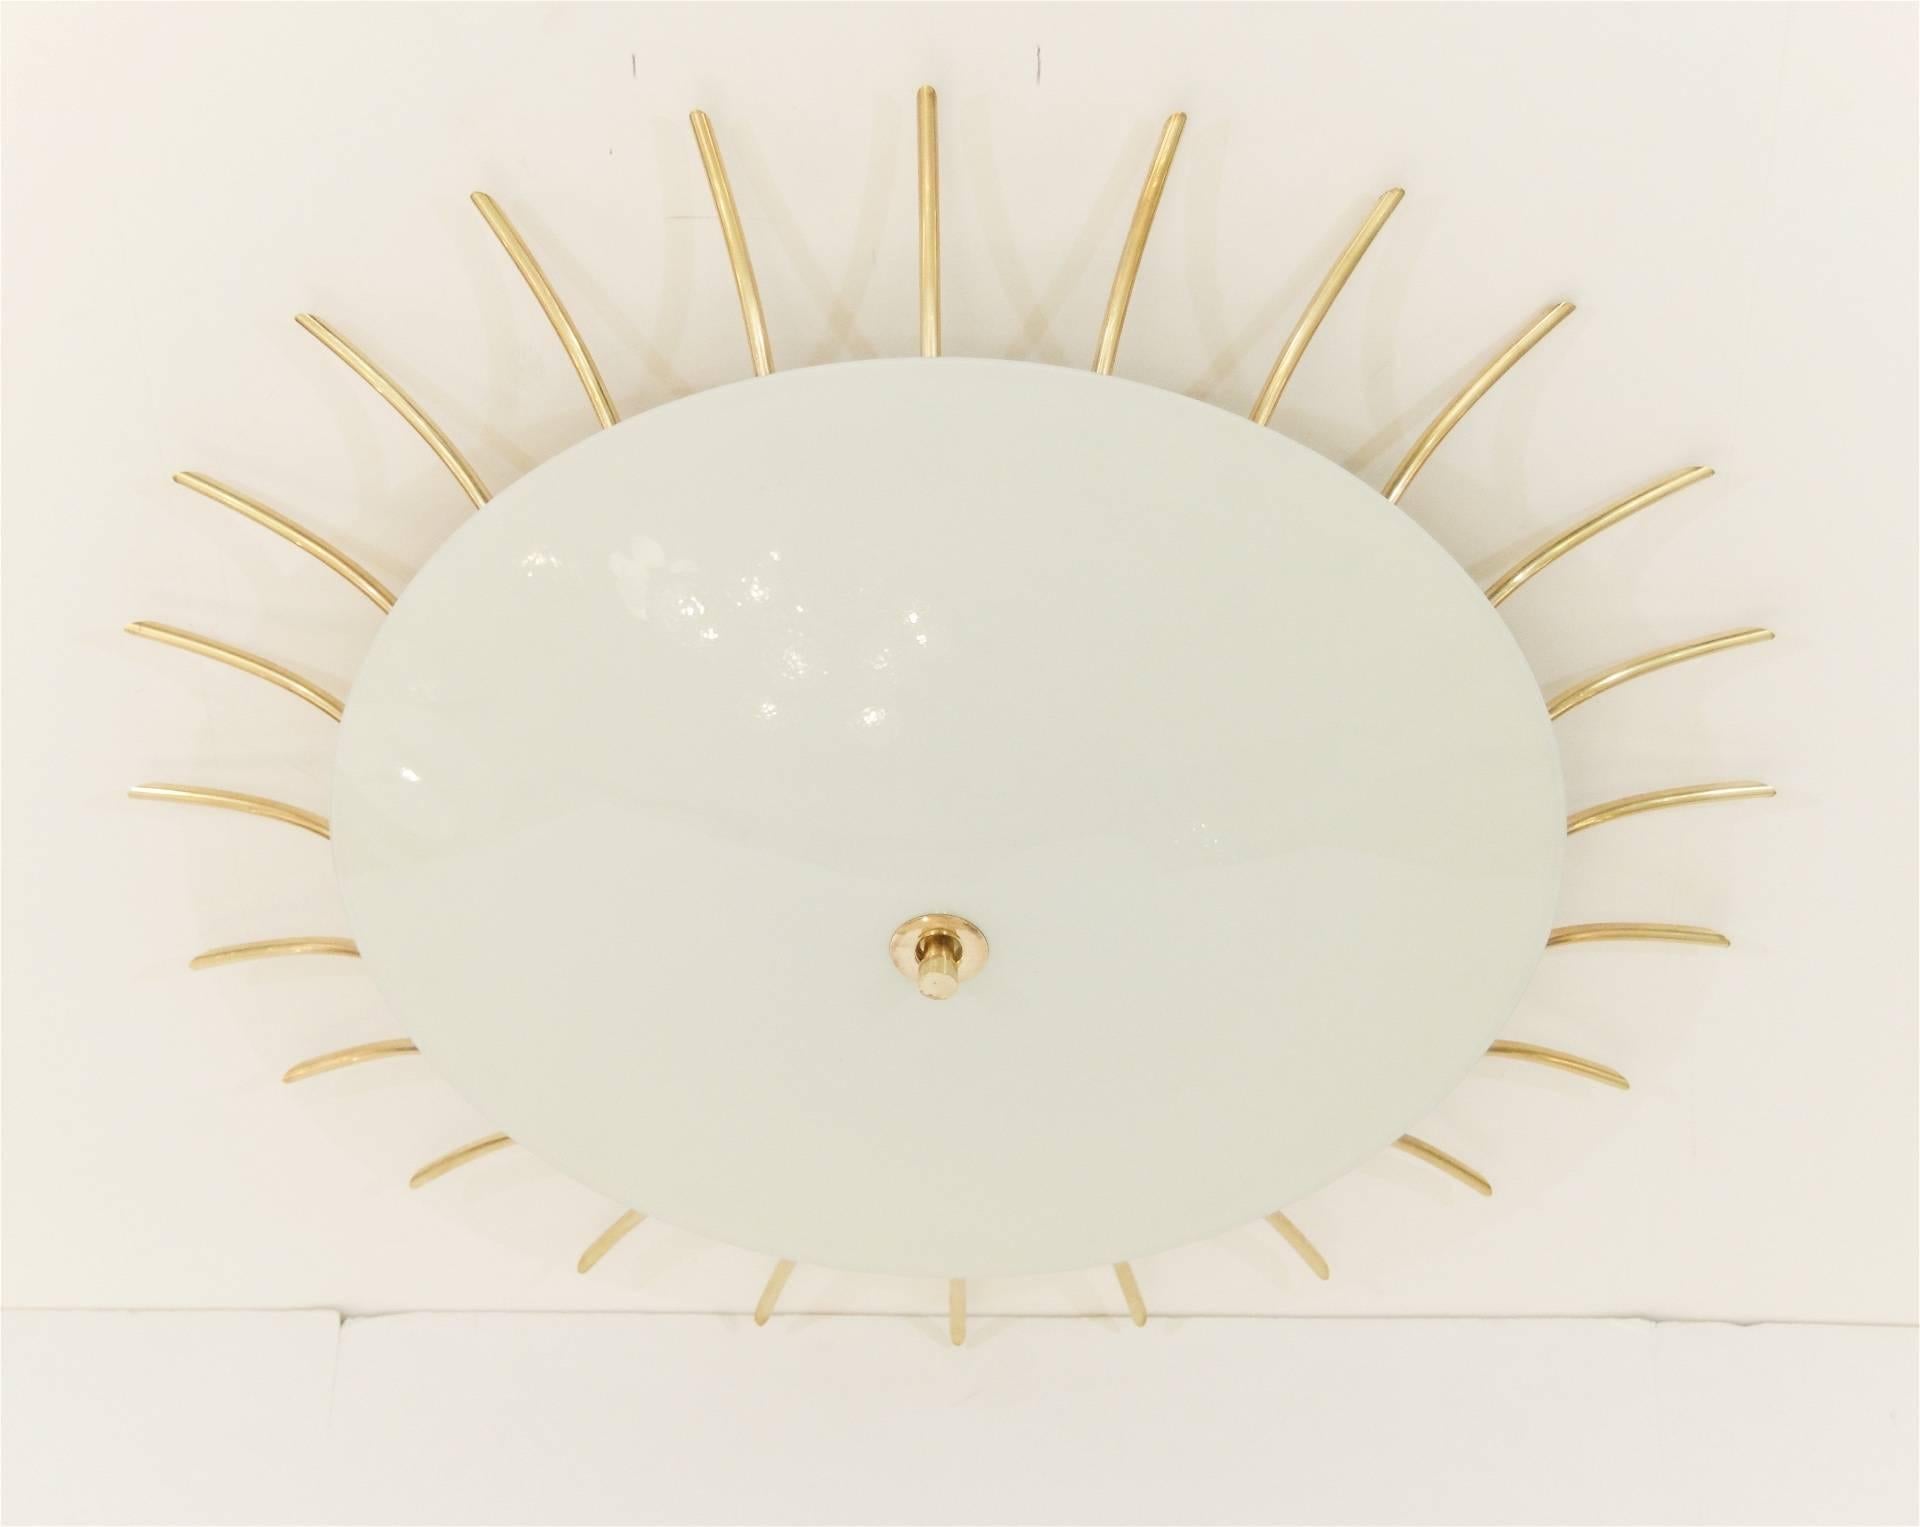 Grand scale flush mount with individual pieces of arced brass radiating around a glossy opal glass domed center plate.

Takes three medium base bulbs up to 60 watts per bulb. New wiring.